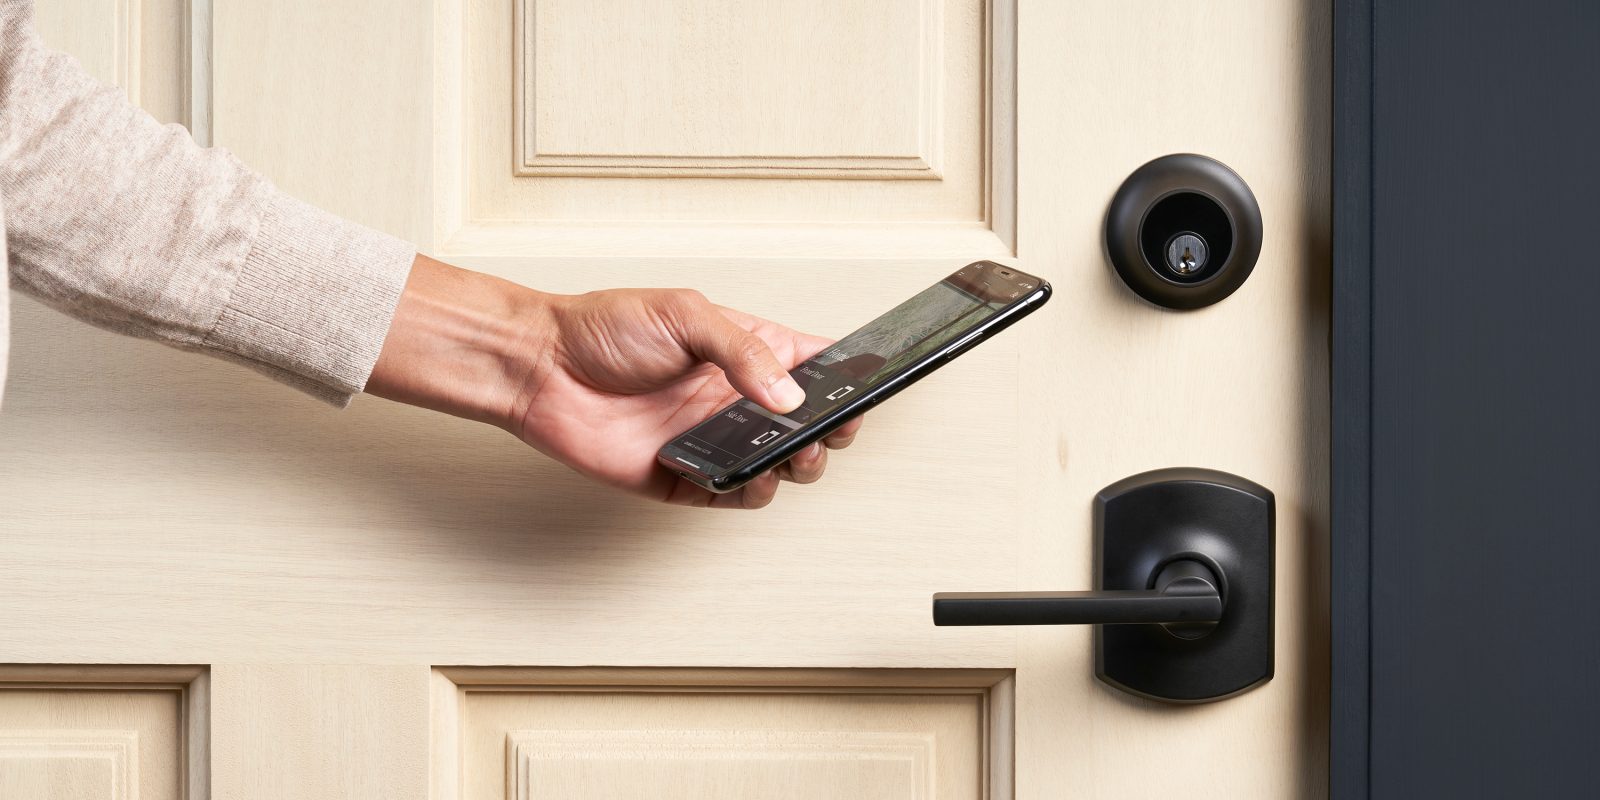 Level Lock claims to be the smallest smart lock